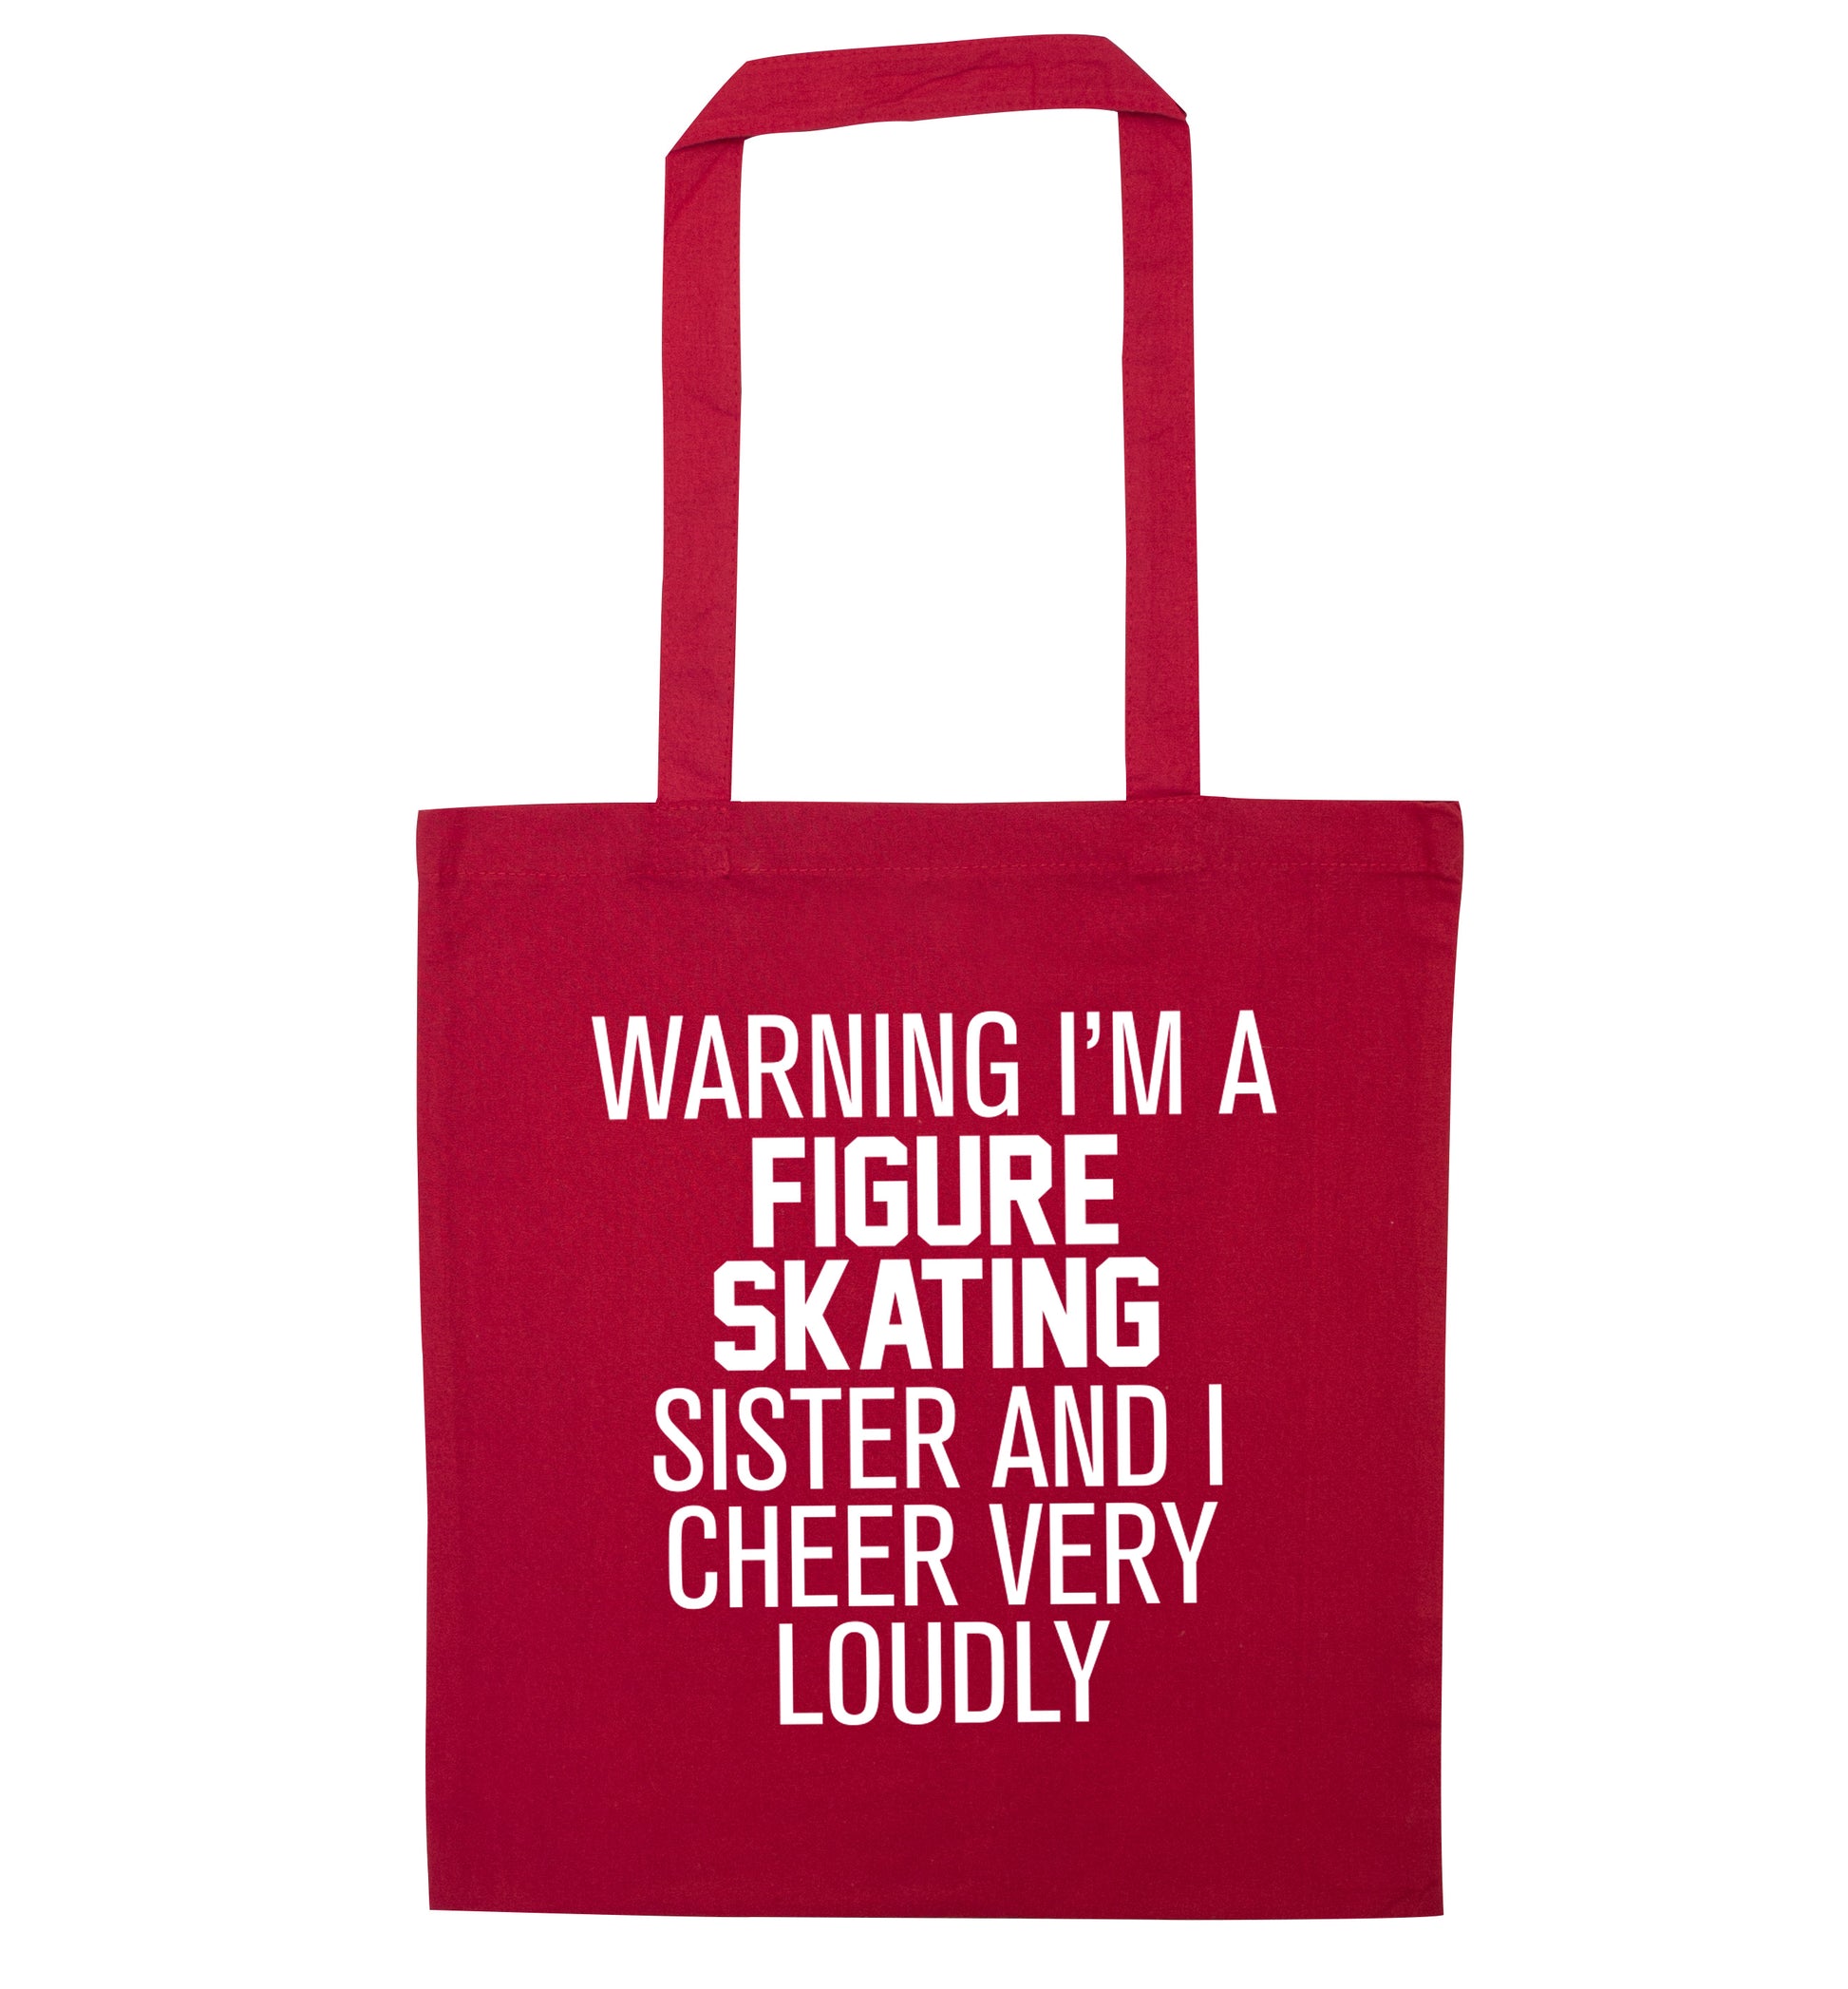 Warning I'm a figure skating sister and I cheer very loudly red tote bag